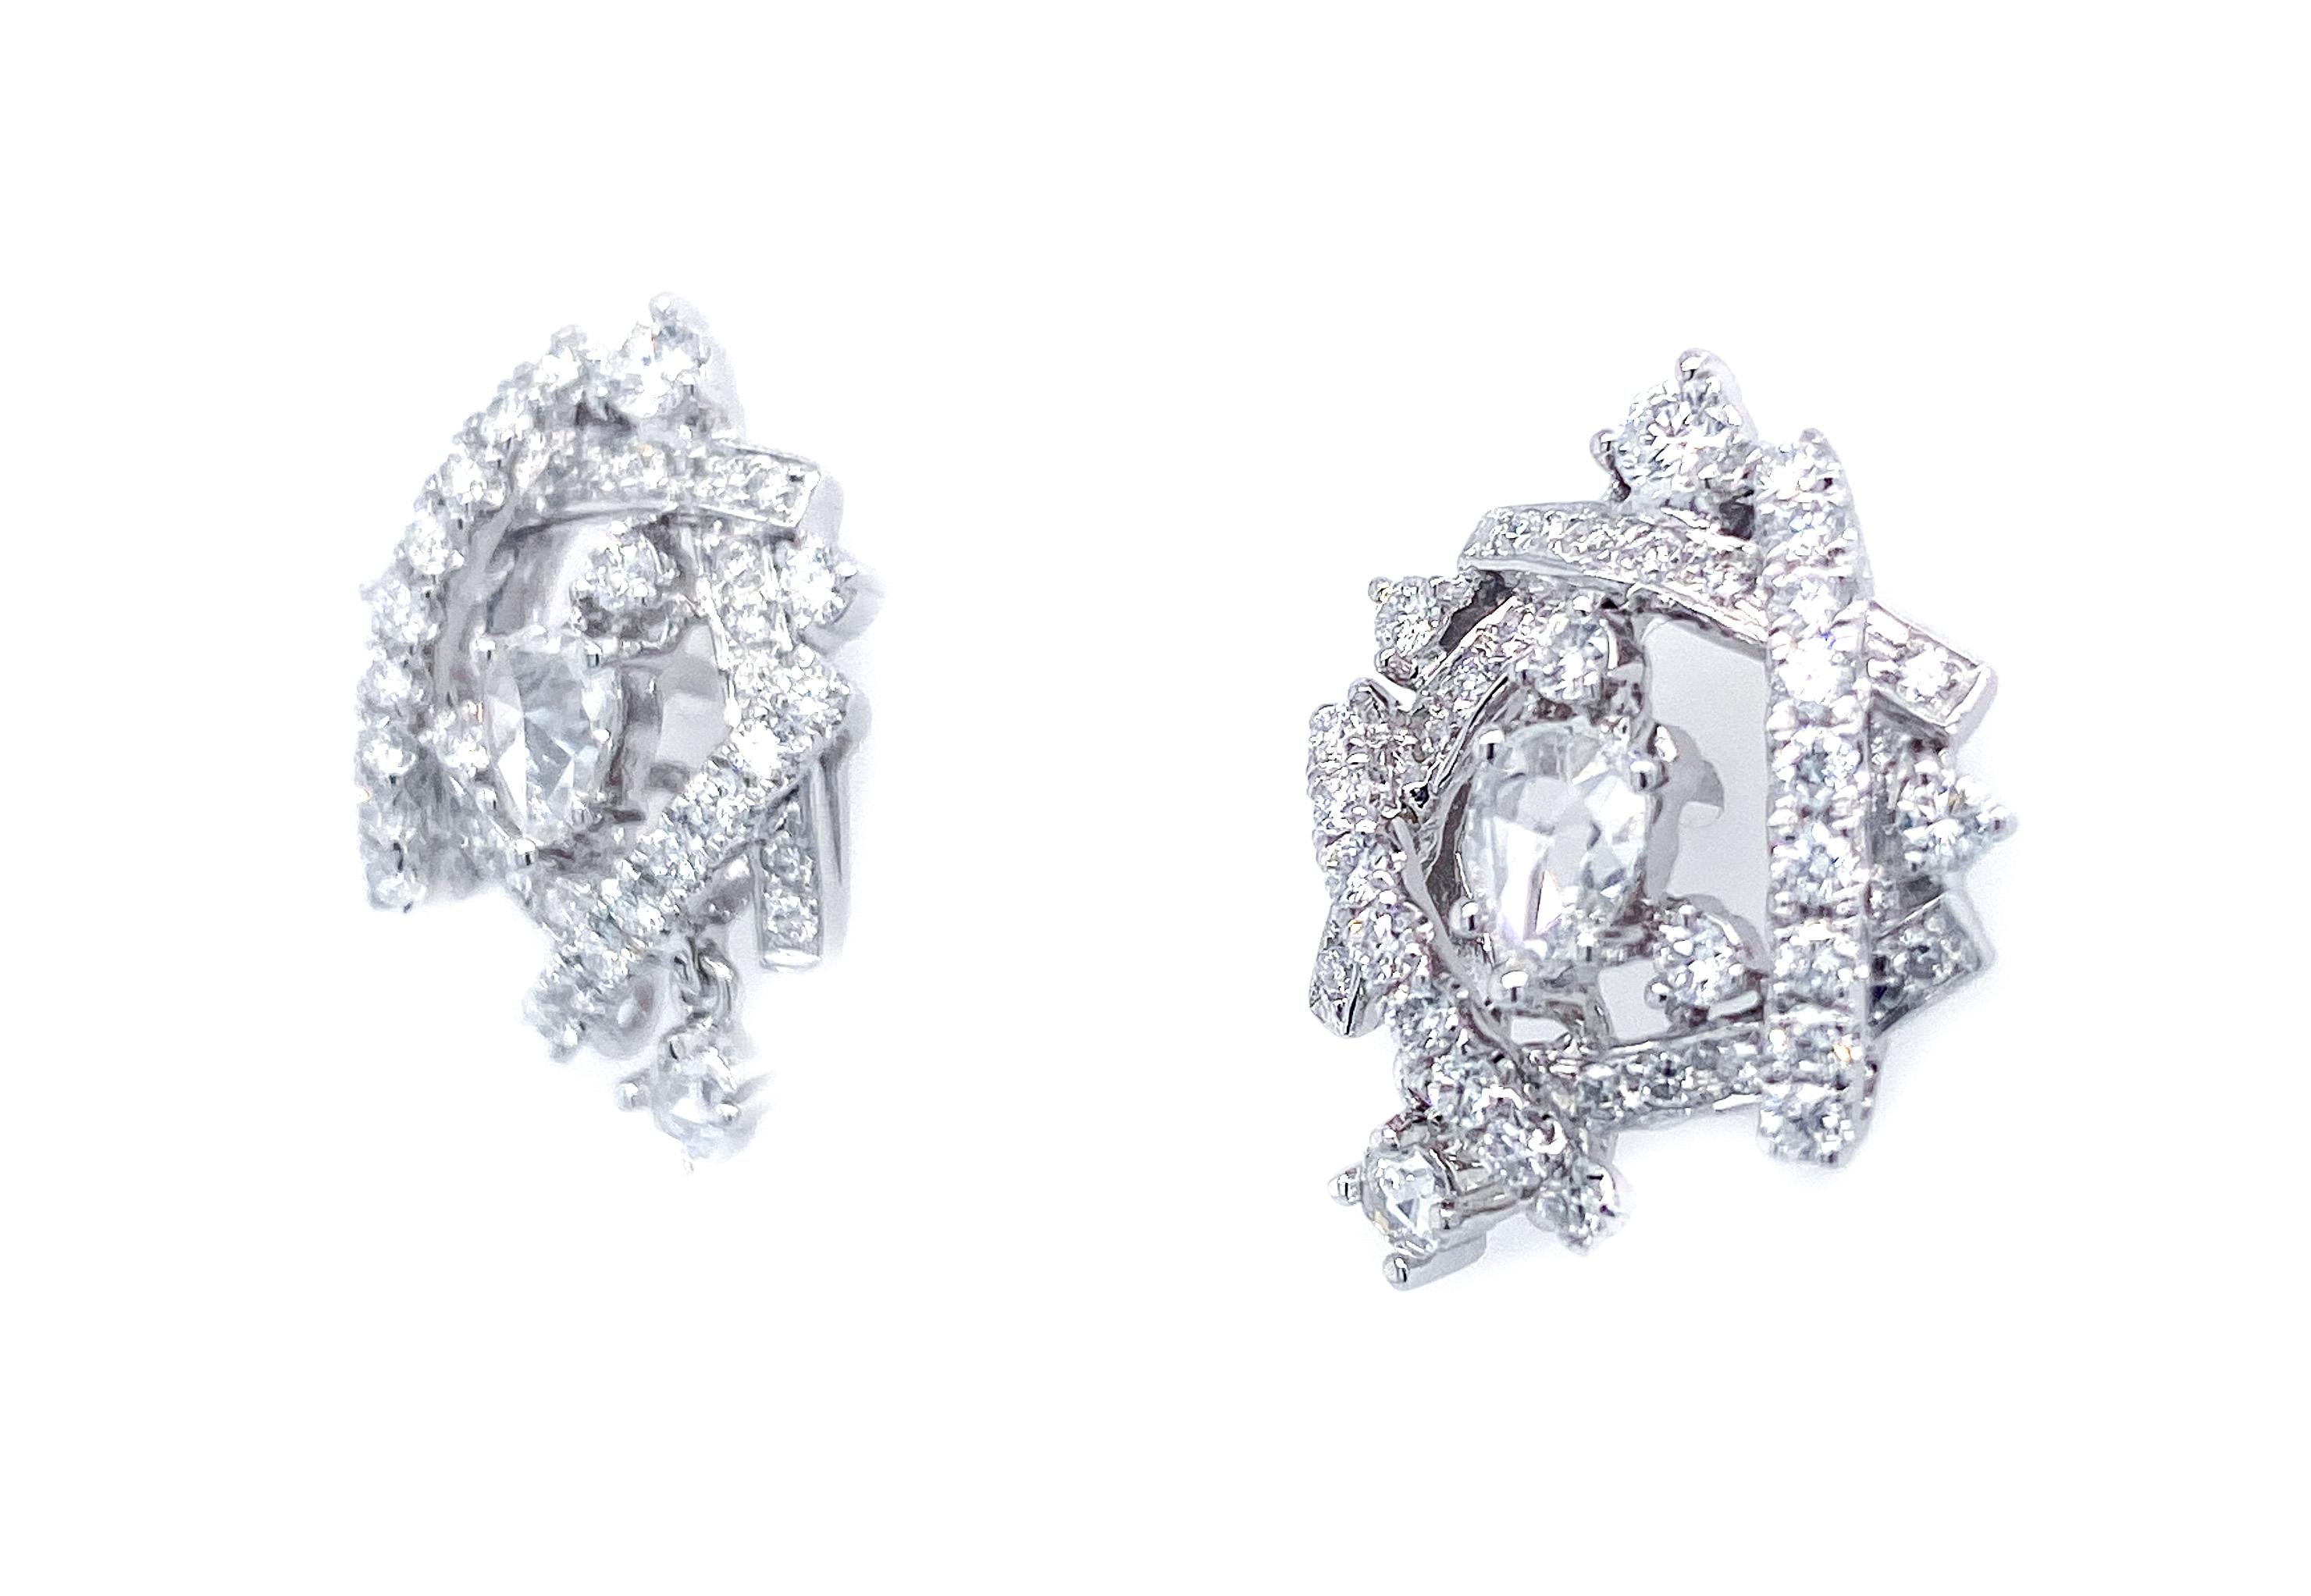 An artful yet extremely refreshing design of 72 interlacing round diamonds, totaling .83 carat, and 4 clear and clean old cut diamonds, totaling .41 carat. These beautifully wearable earrings also brings an element of liveliness, with a diamond